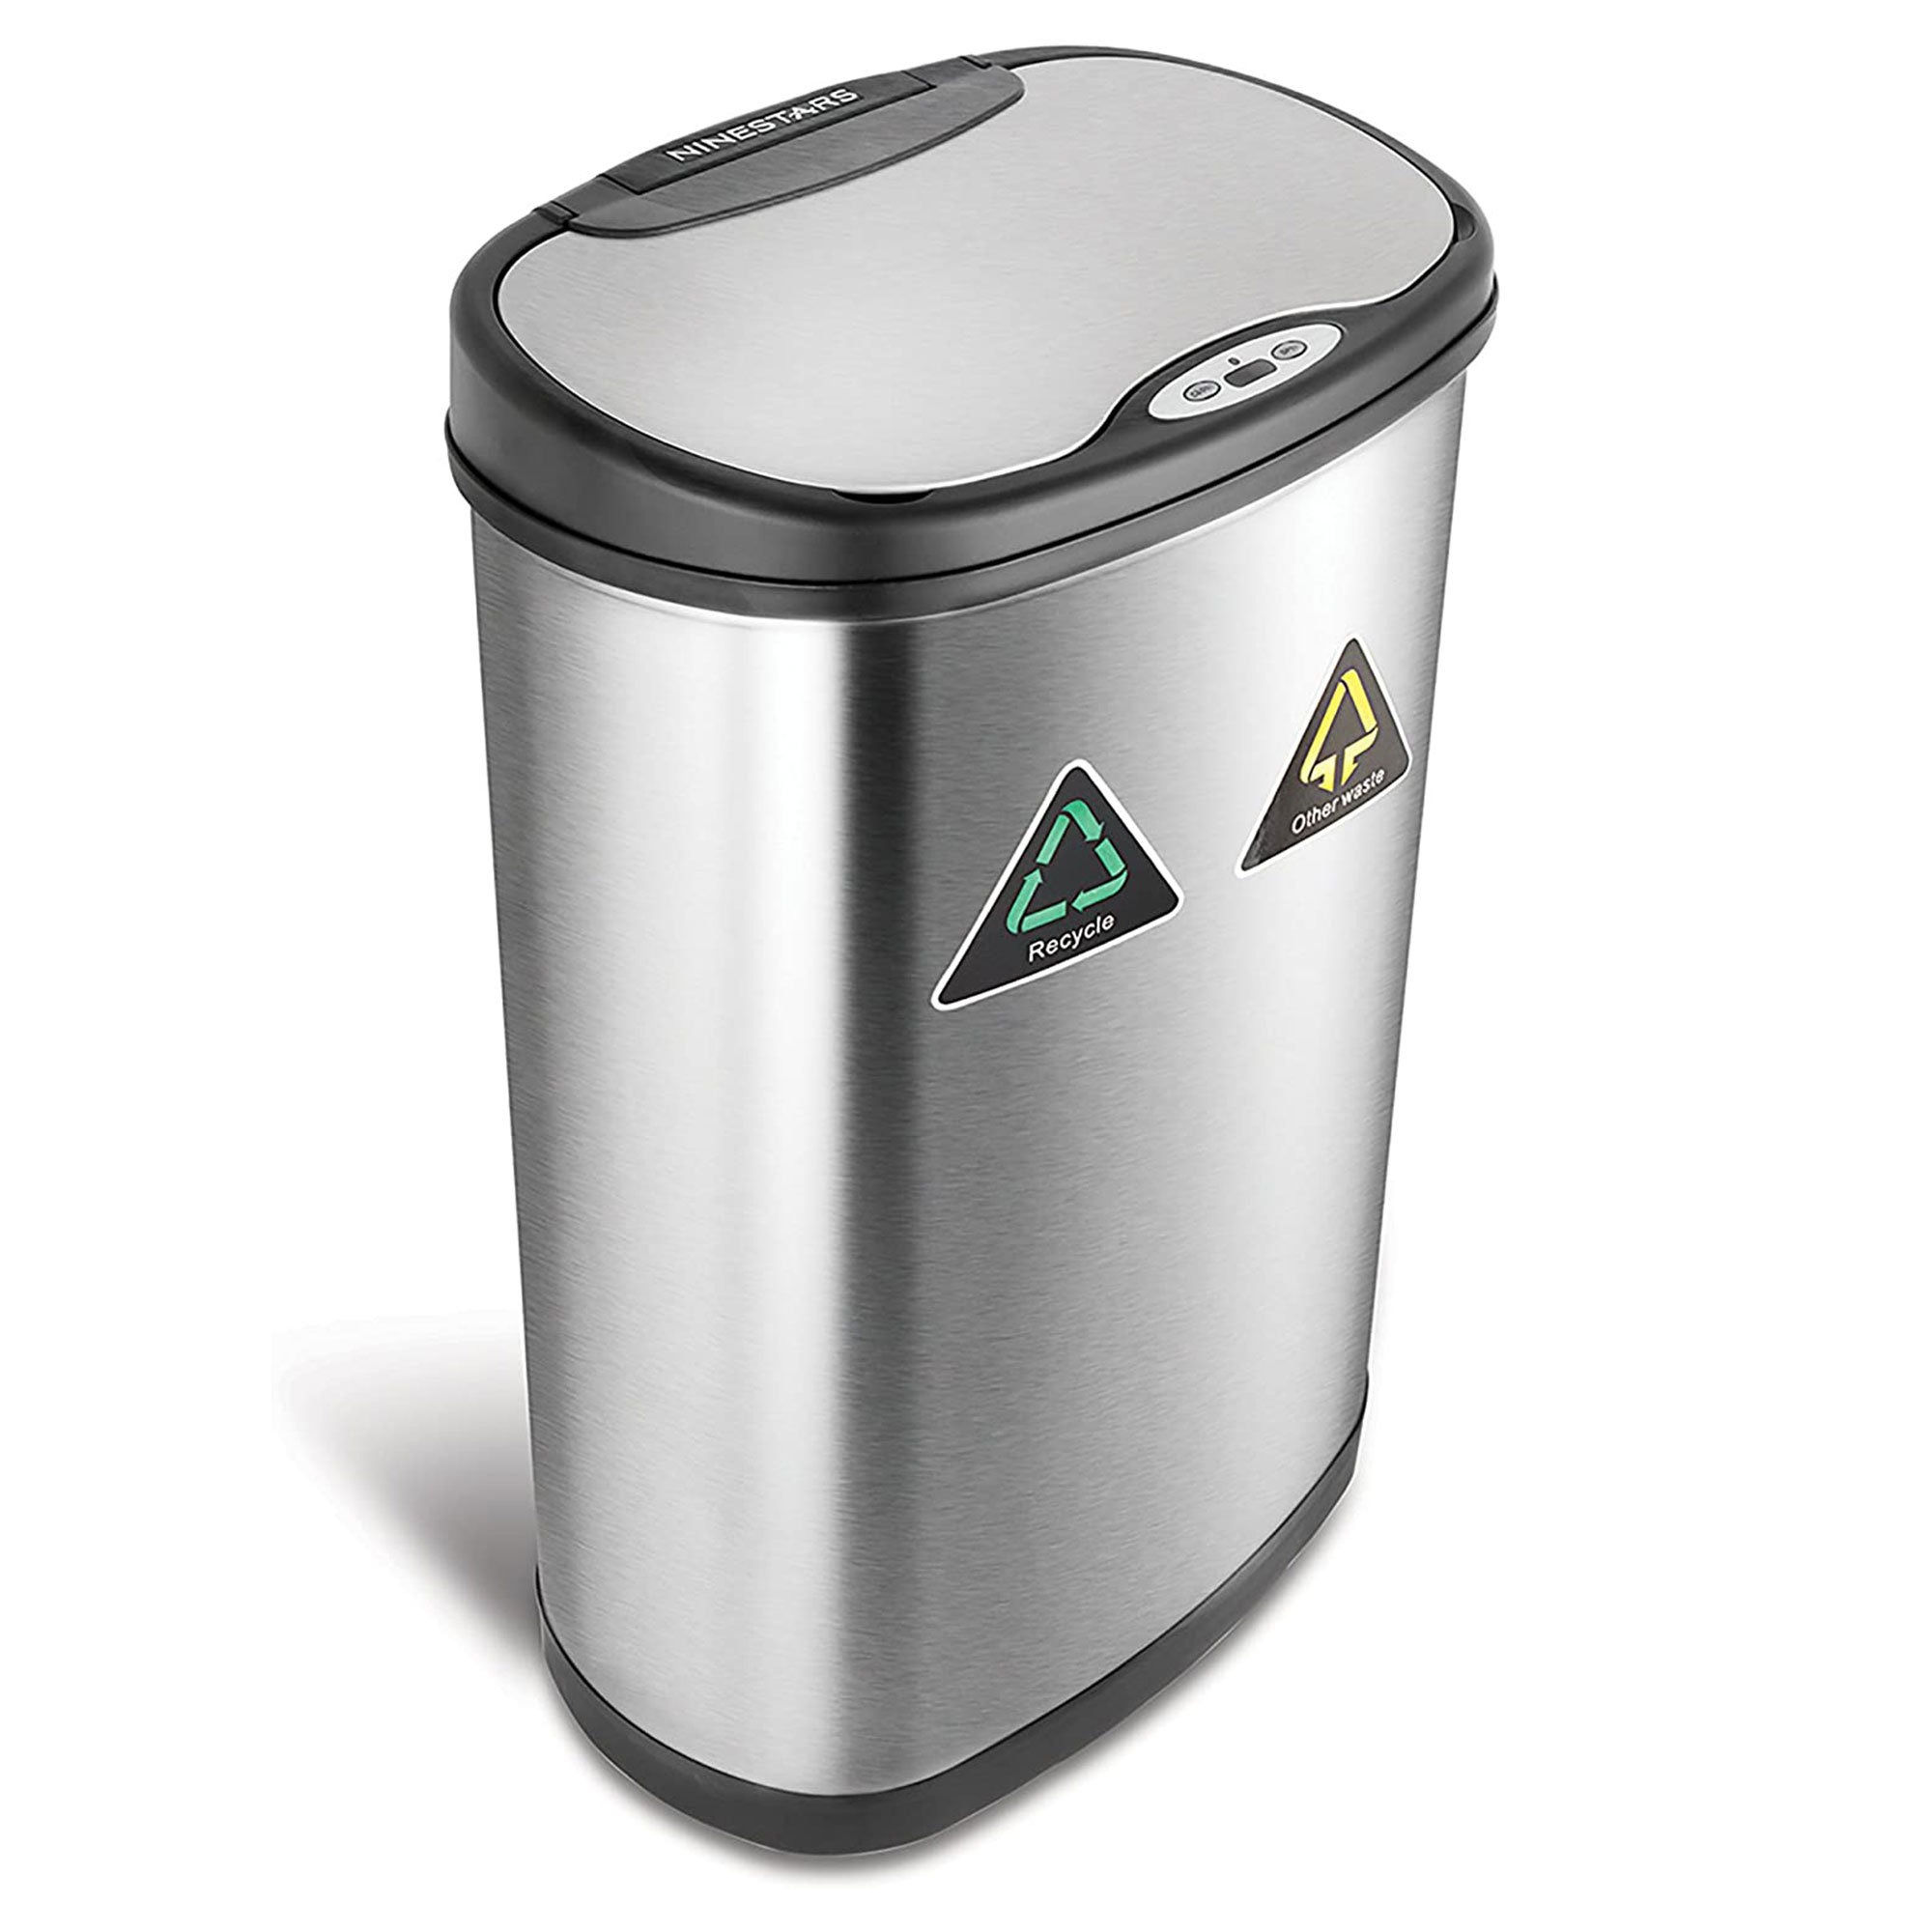 Sangdo 14.5 Gallons Steel Trash Can